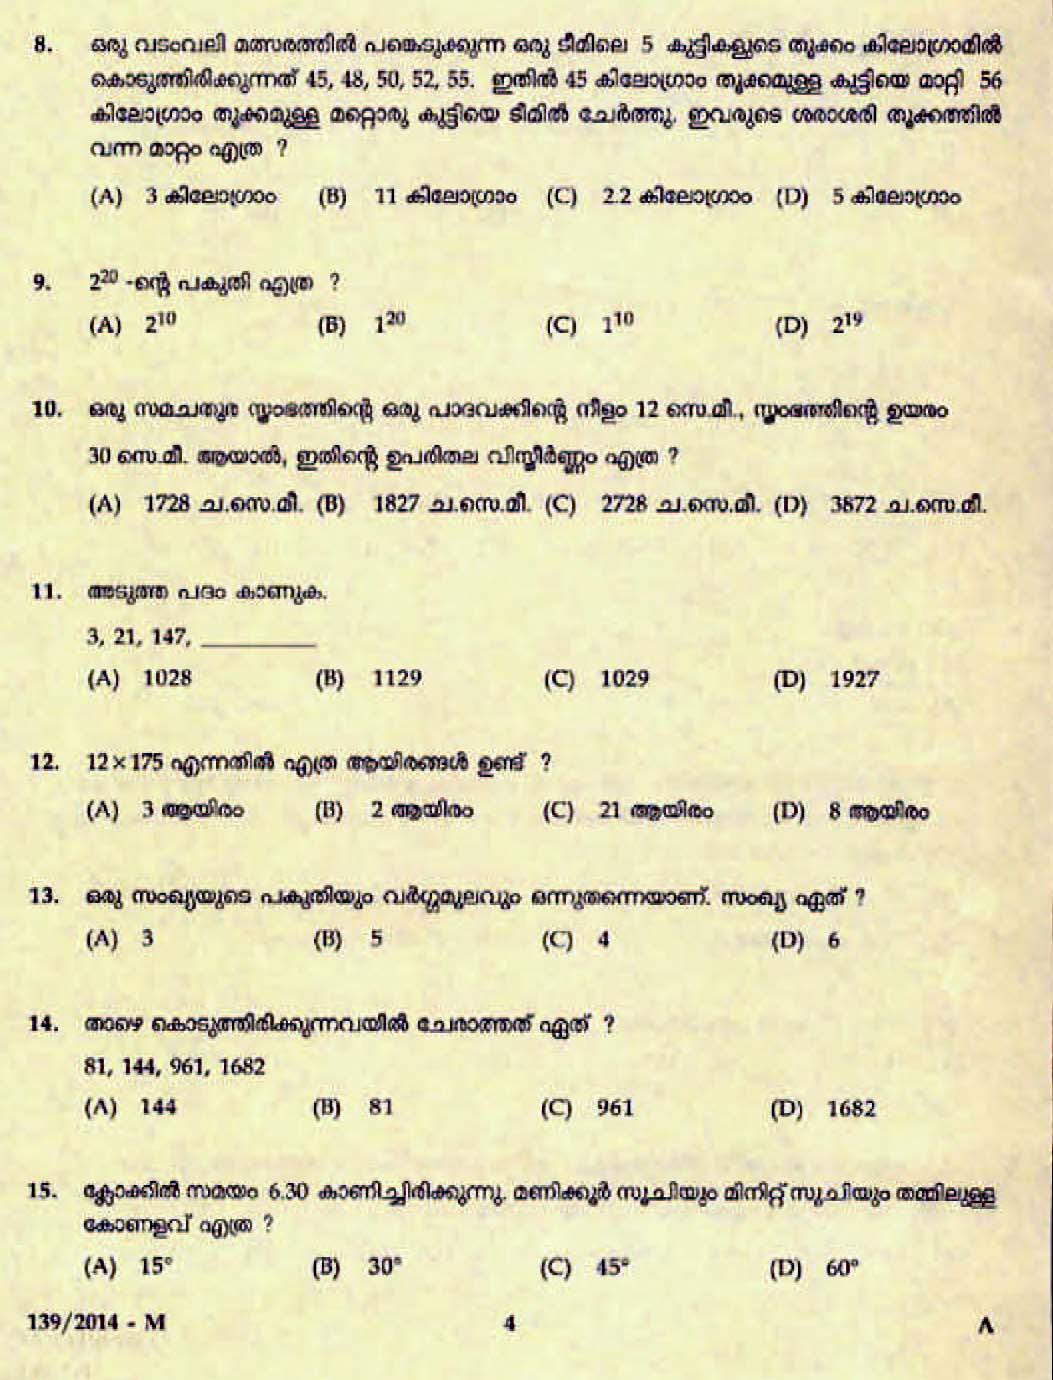 LD Clerk Various Question Paper Malayalam 2014 Paper Code 1392014 M 2